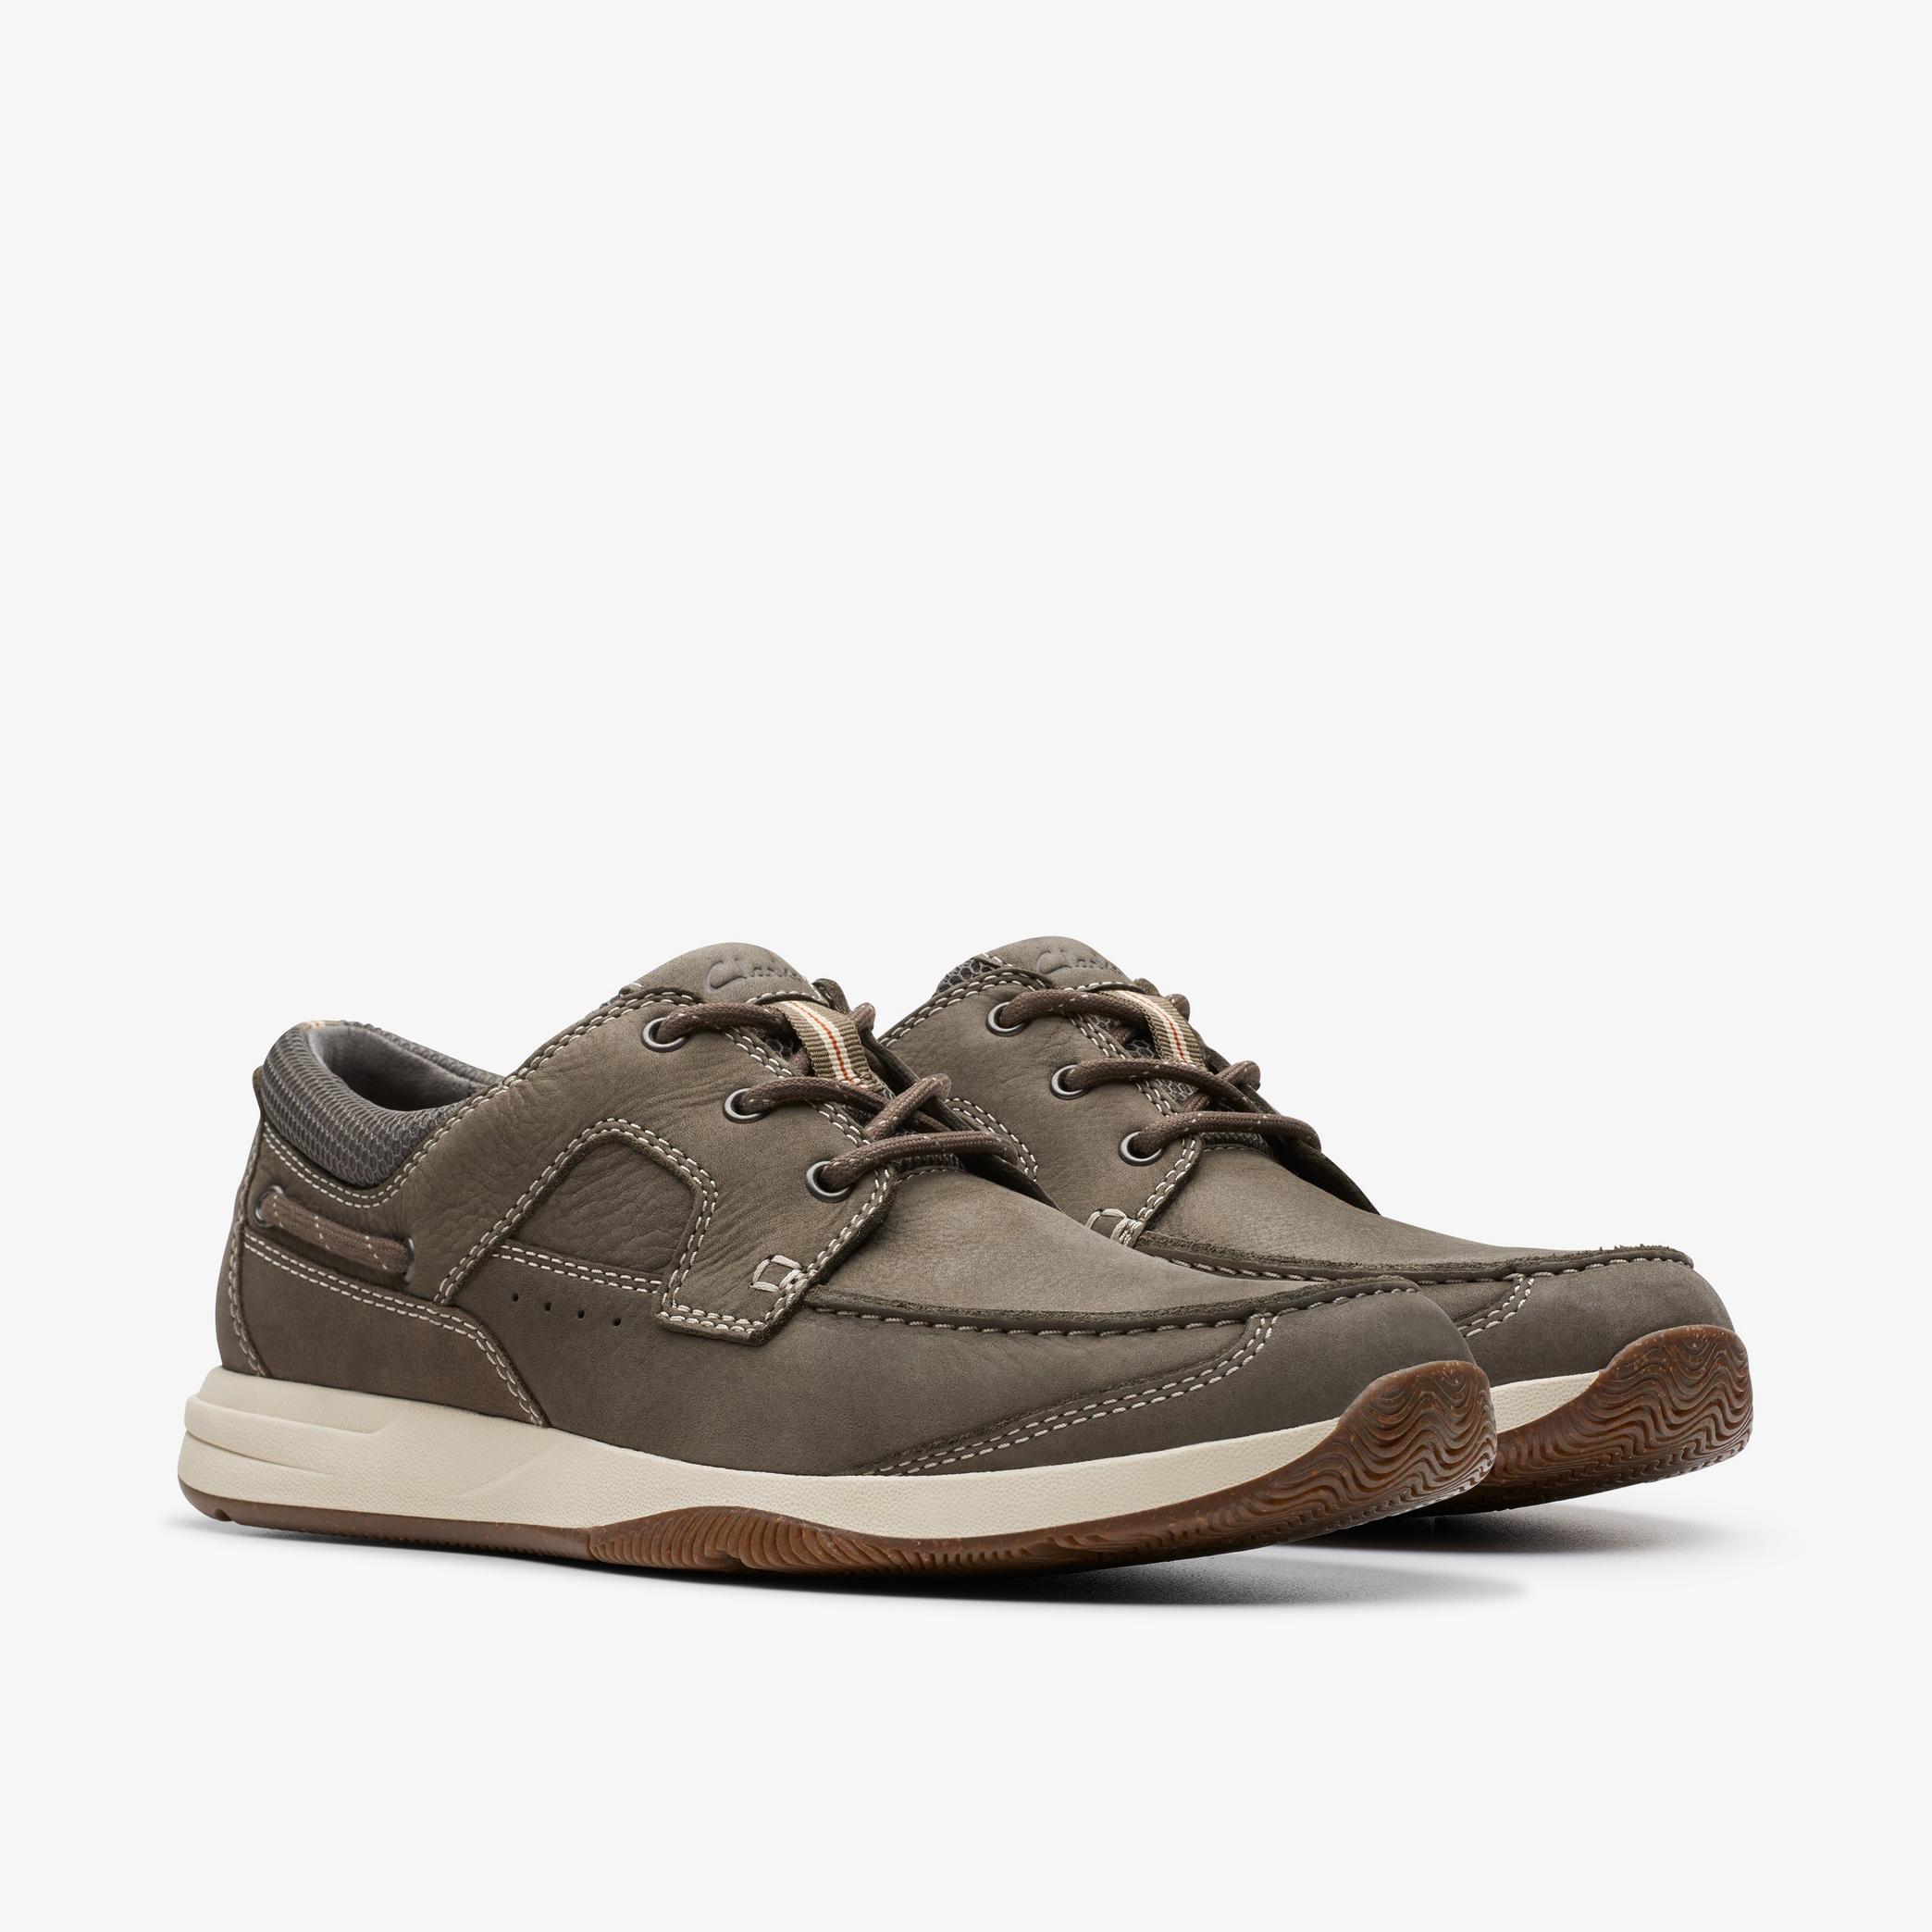 Sailview Lace Taupe Nubuck Boat Shoes, view 5 of 8